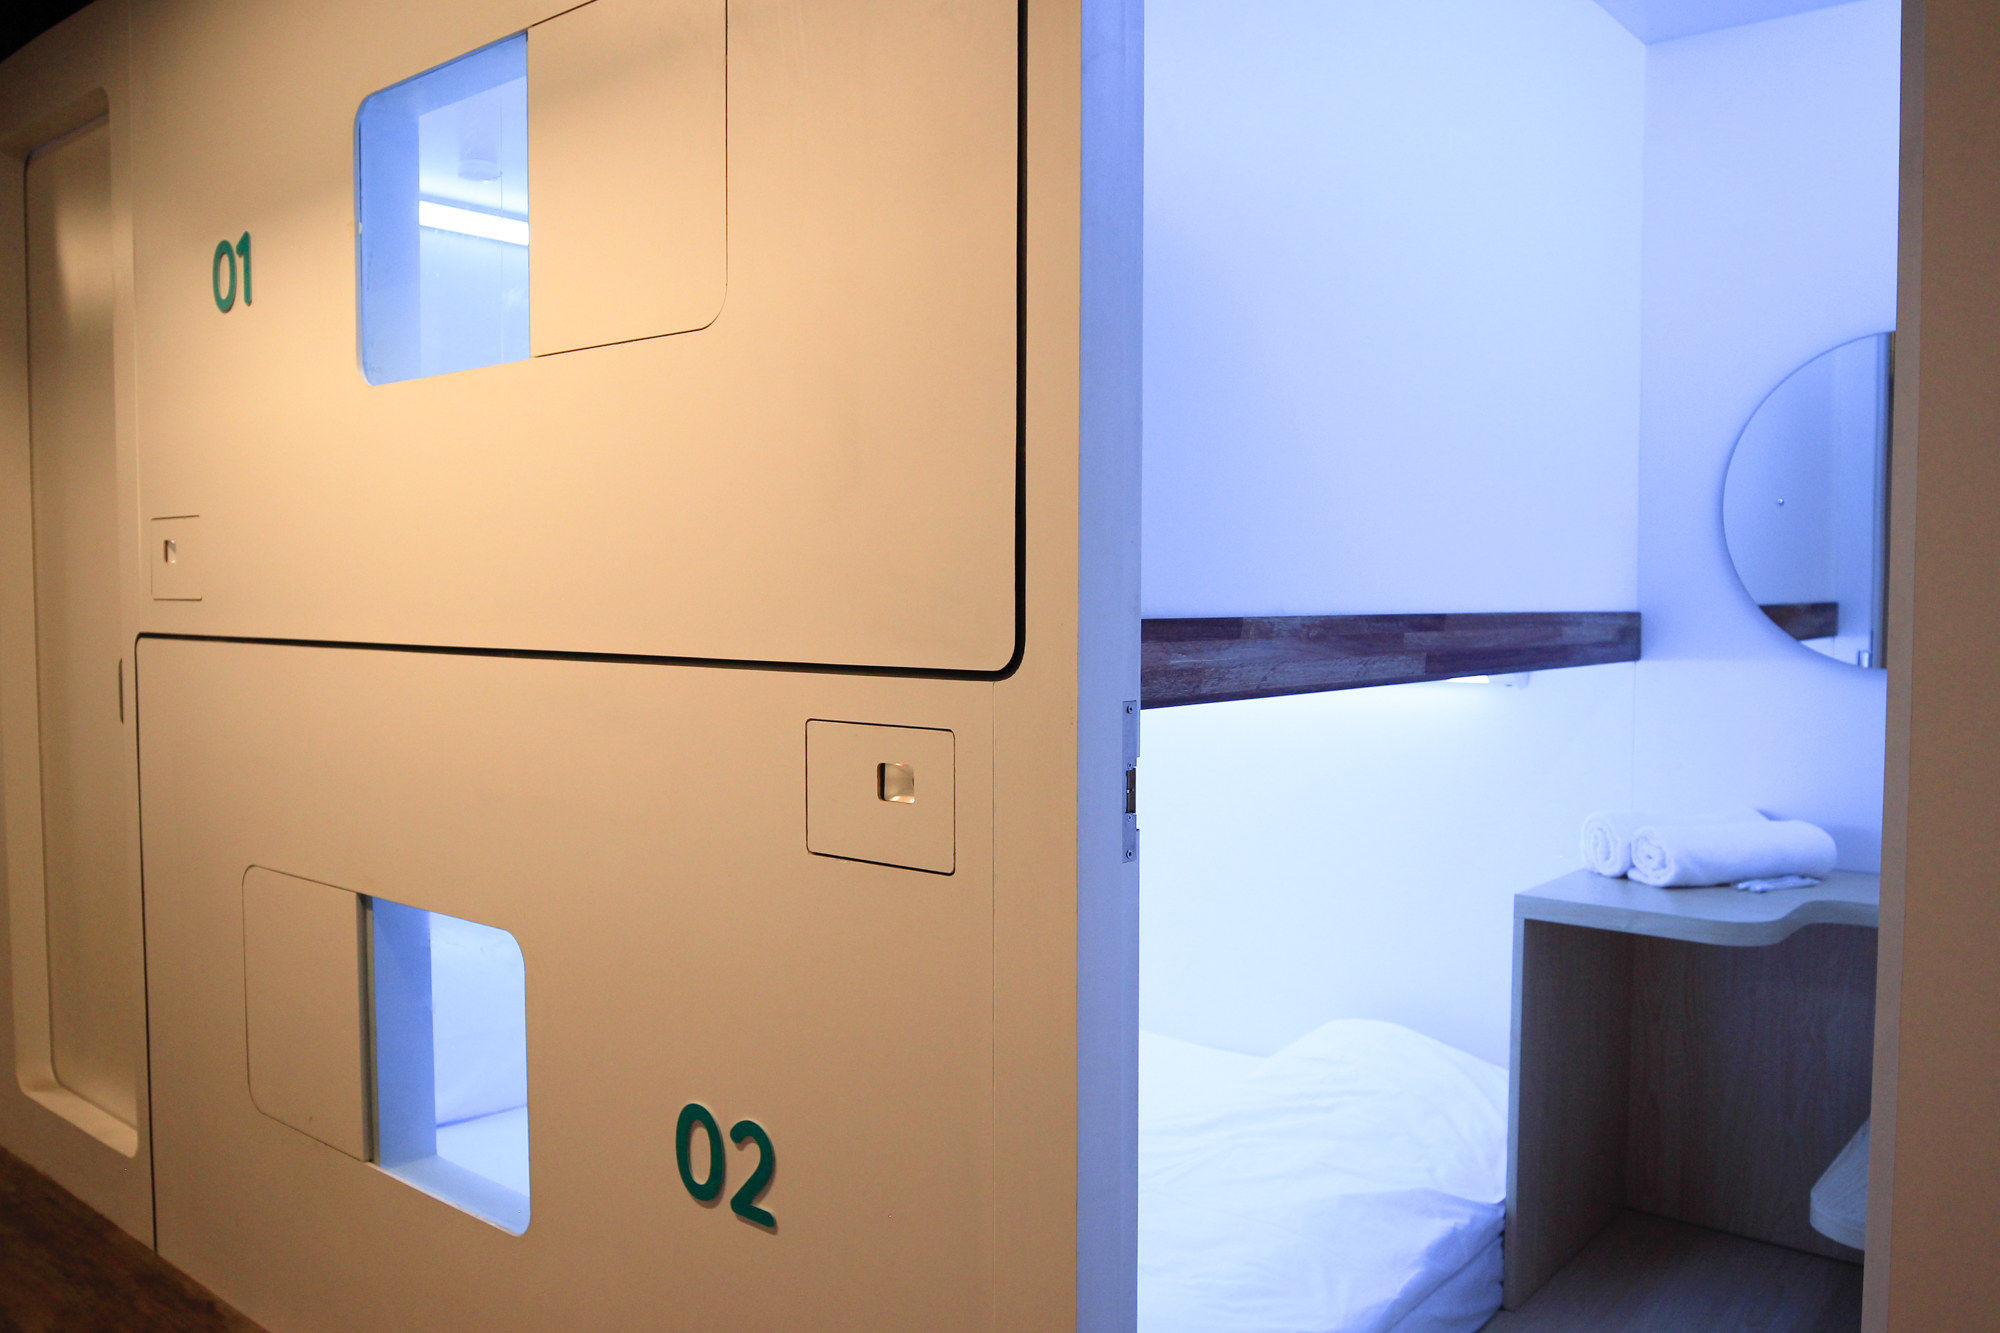 The Bobopod offers solo travellers accommodation akin to Japan’s famous capsule rooms. Photo: SCMP Handout